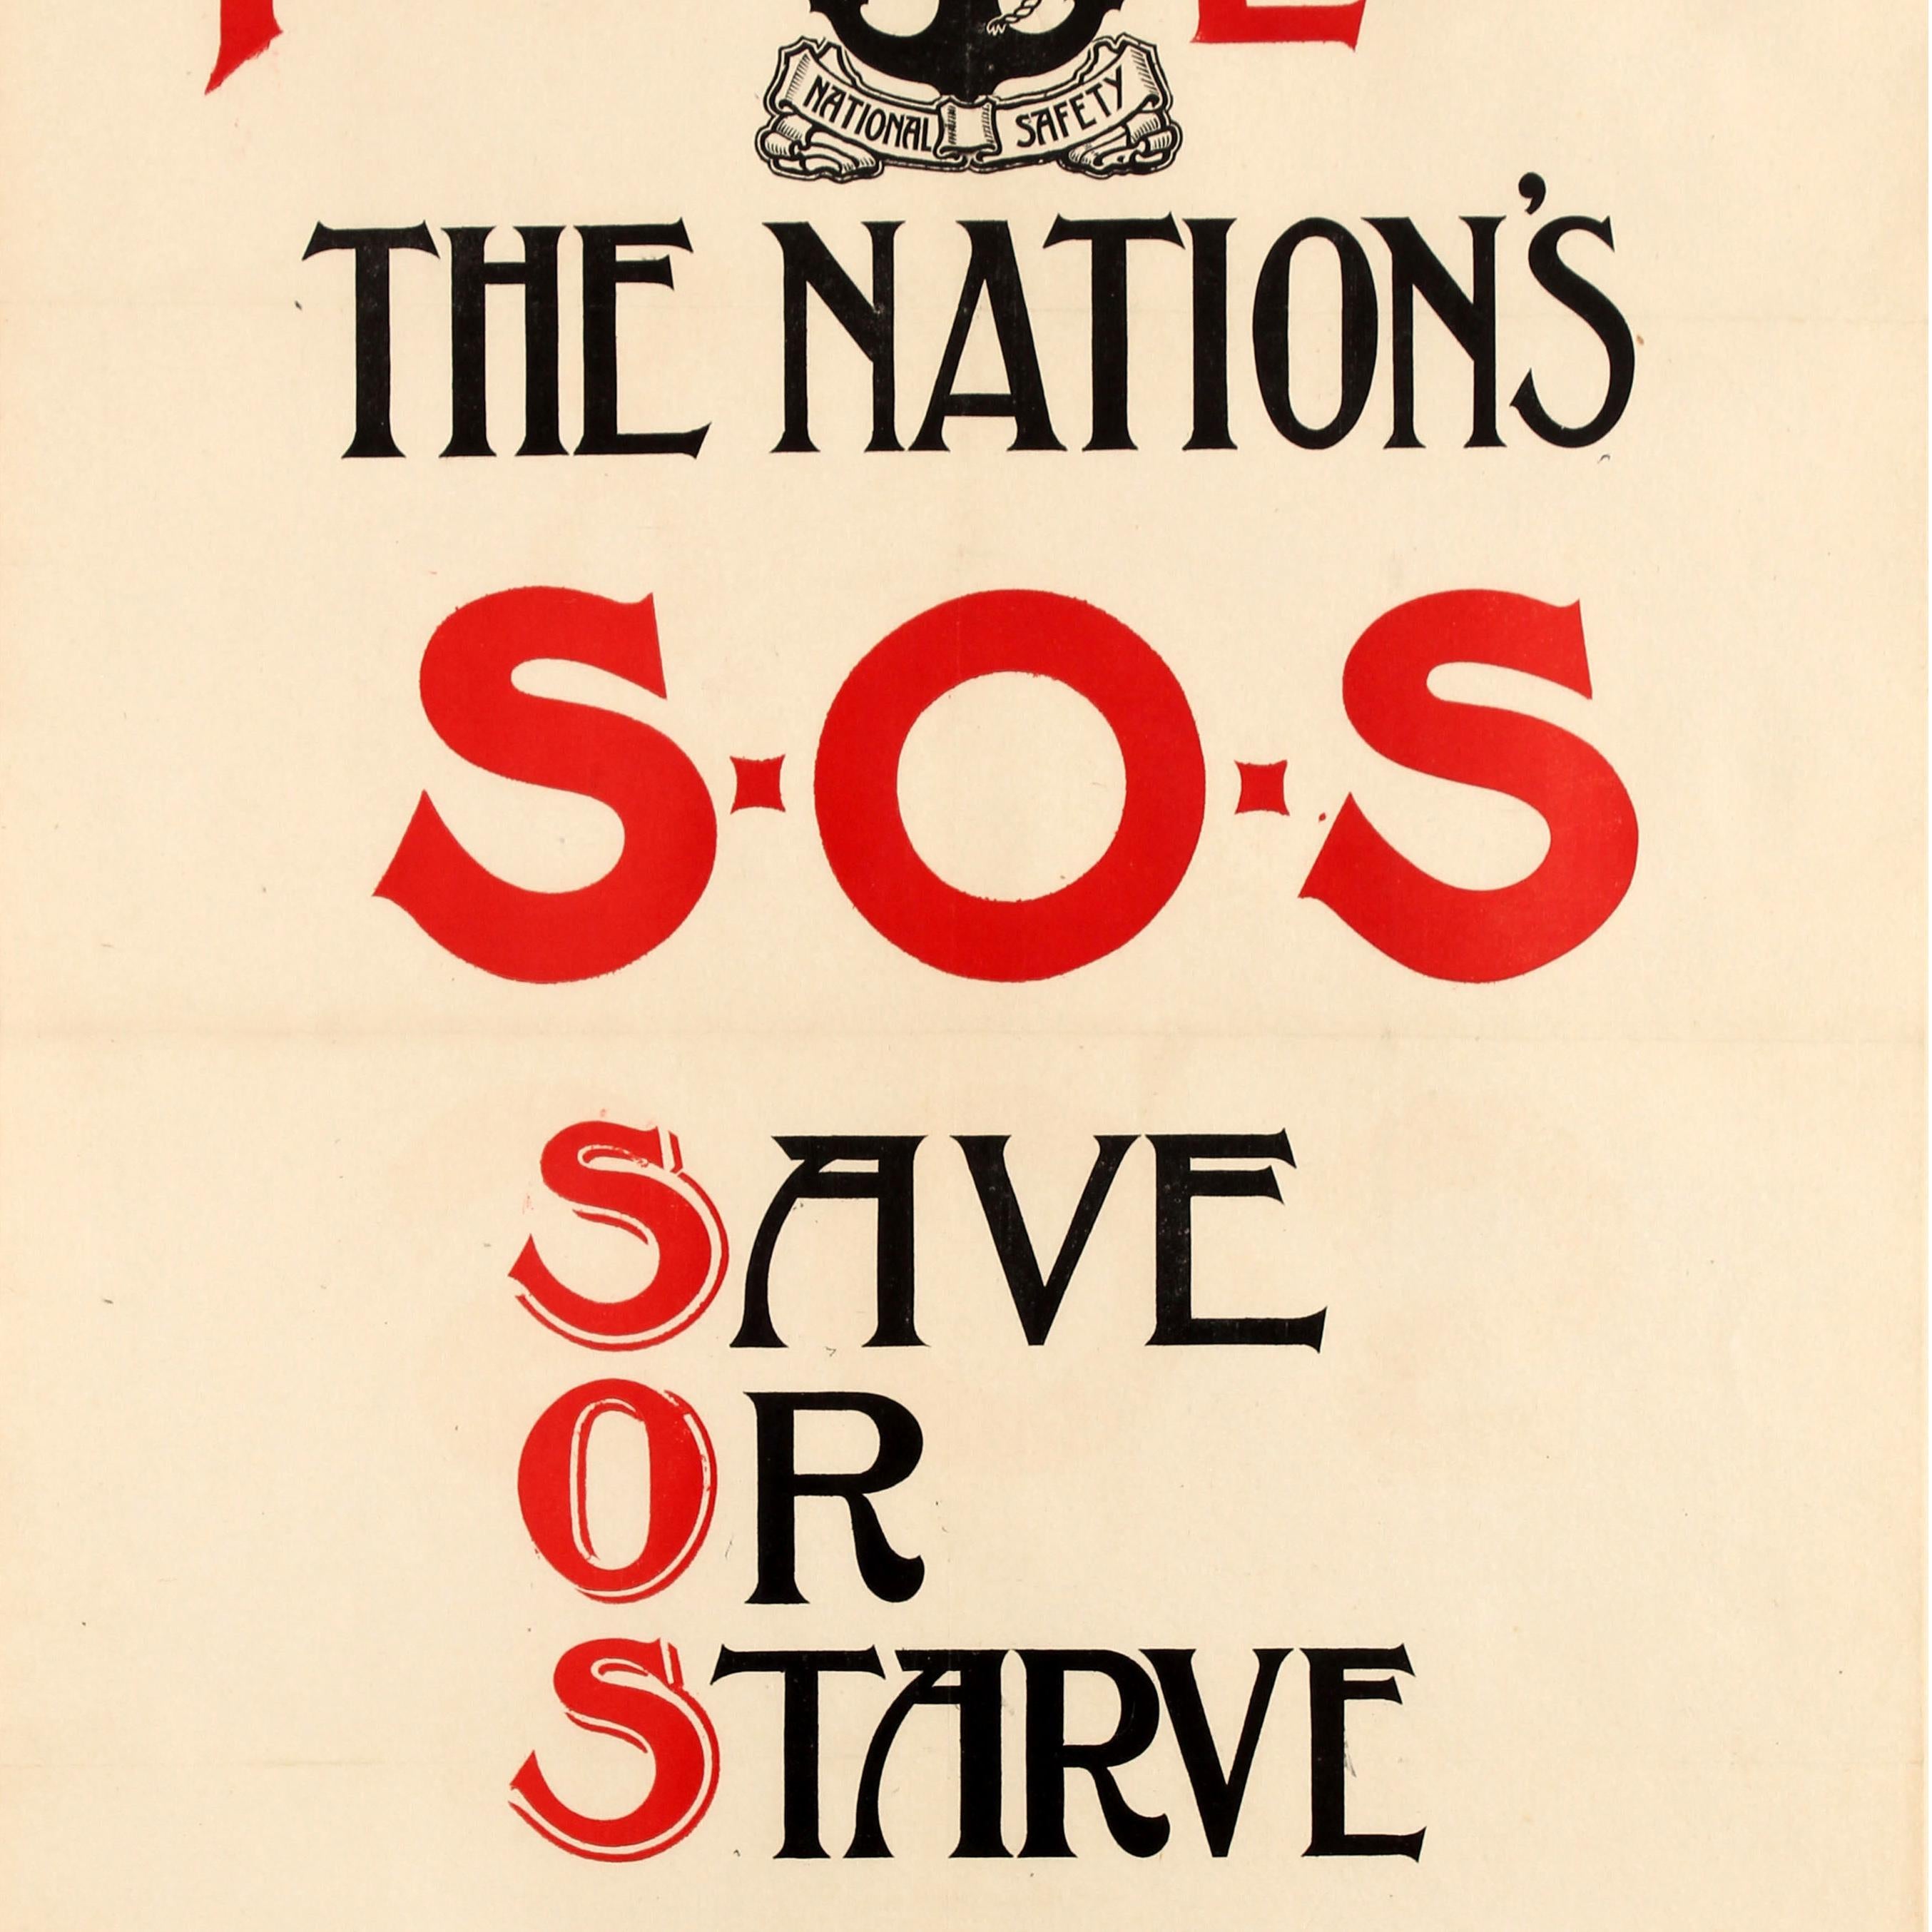 Original antique World War One propaganda poster issued by the League of National Safety to promote rationing and avoiding waste in support of the Food Economy Campaign - National Safety Food Economy The Nation's S.O.S Save Or Starve Join the League